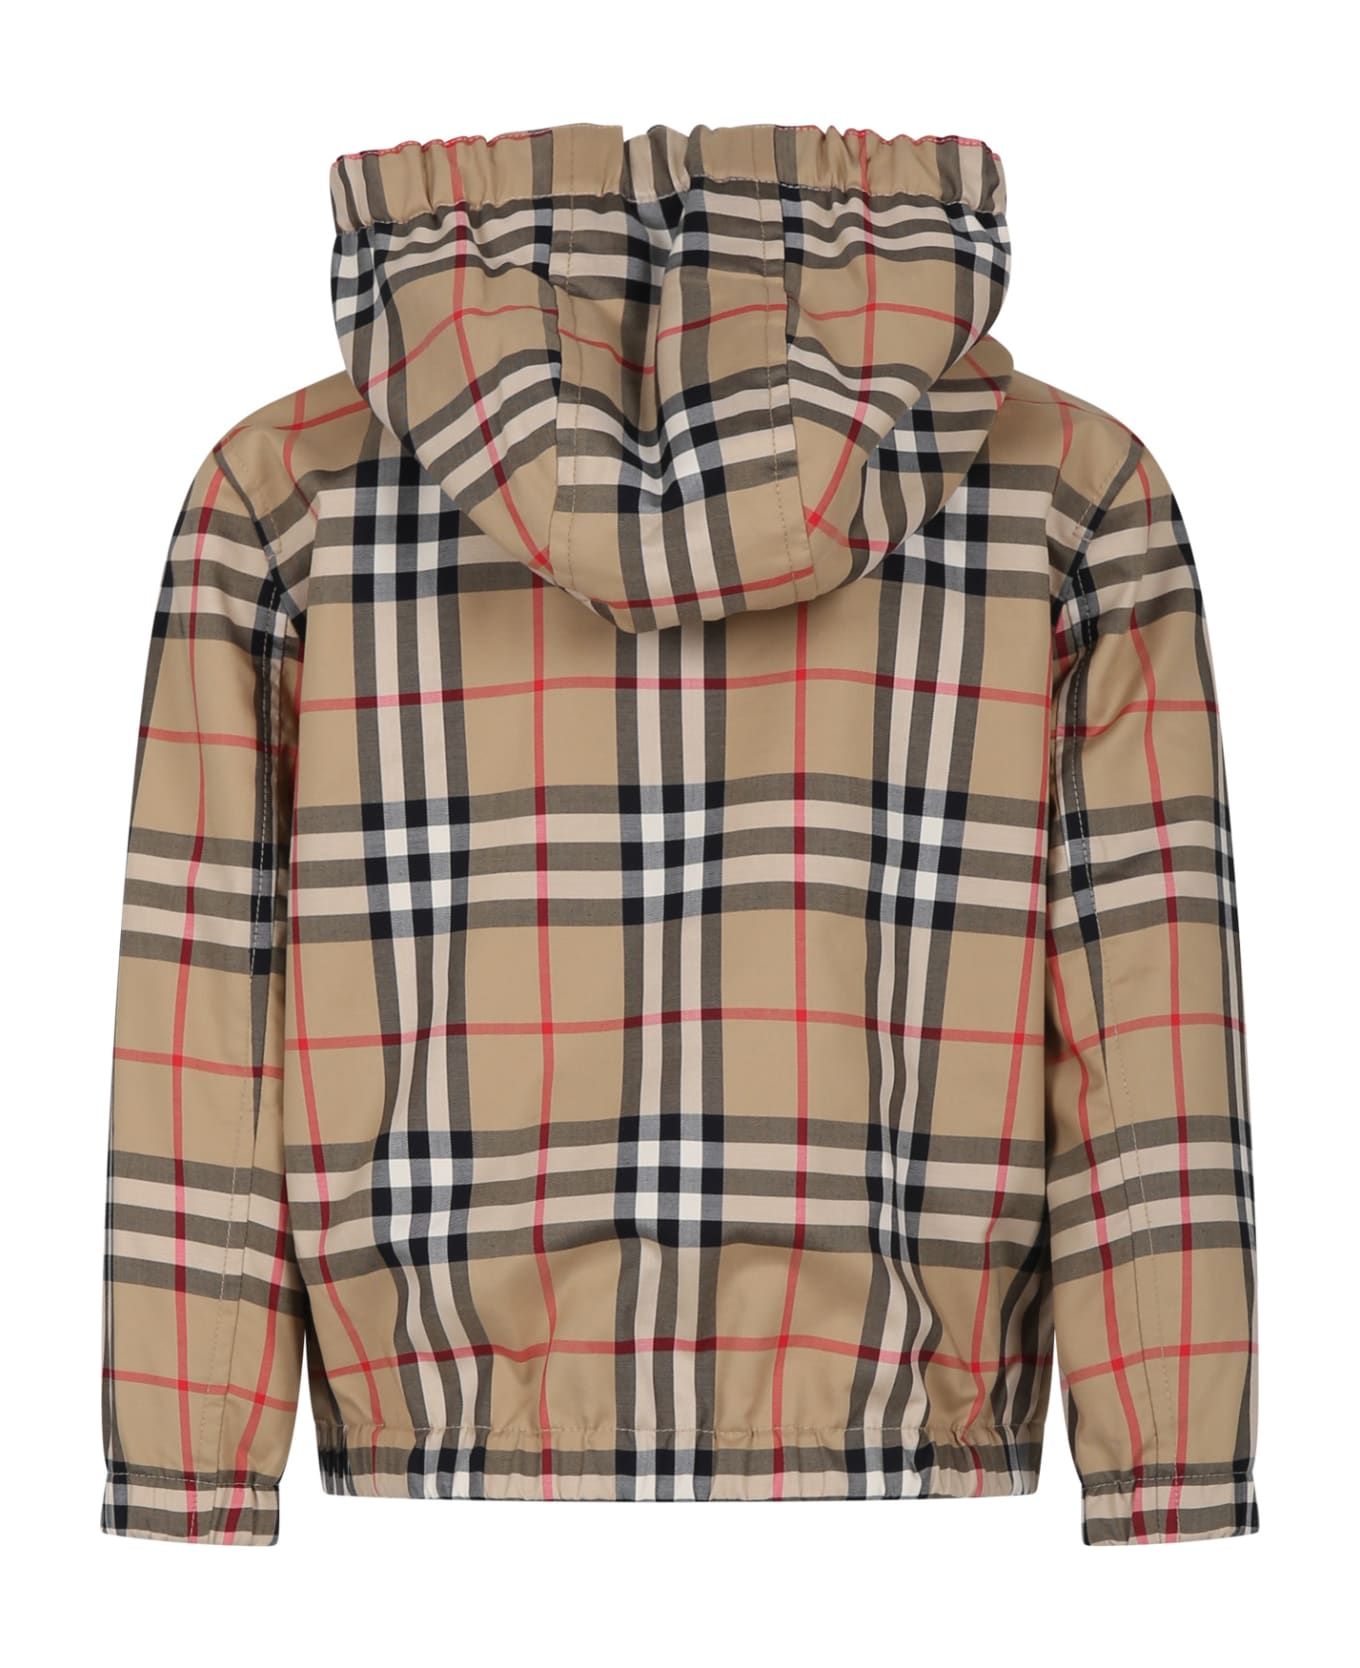 Burberry Beige Jacket For Boy With Iconic Vintage Check - Archive beige